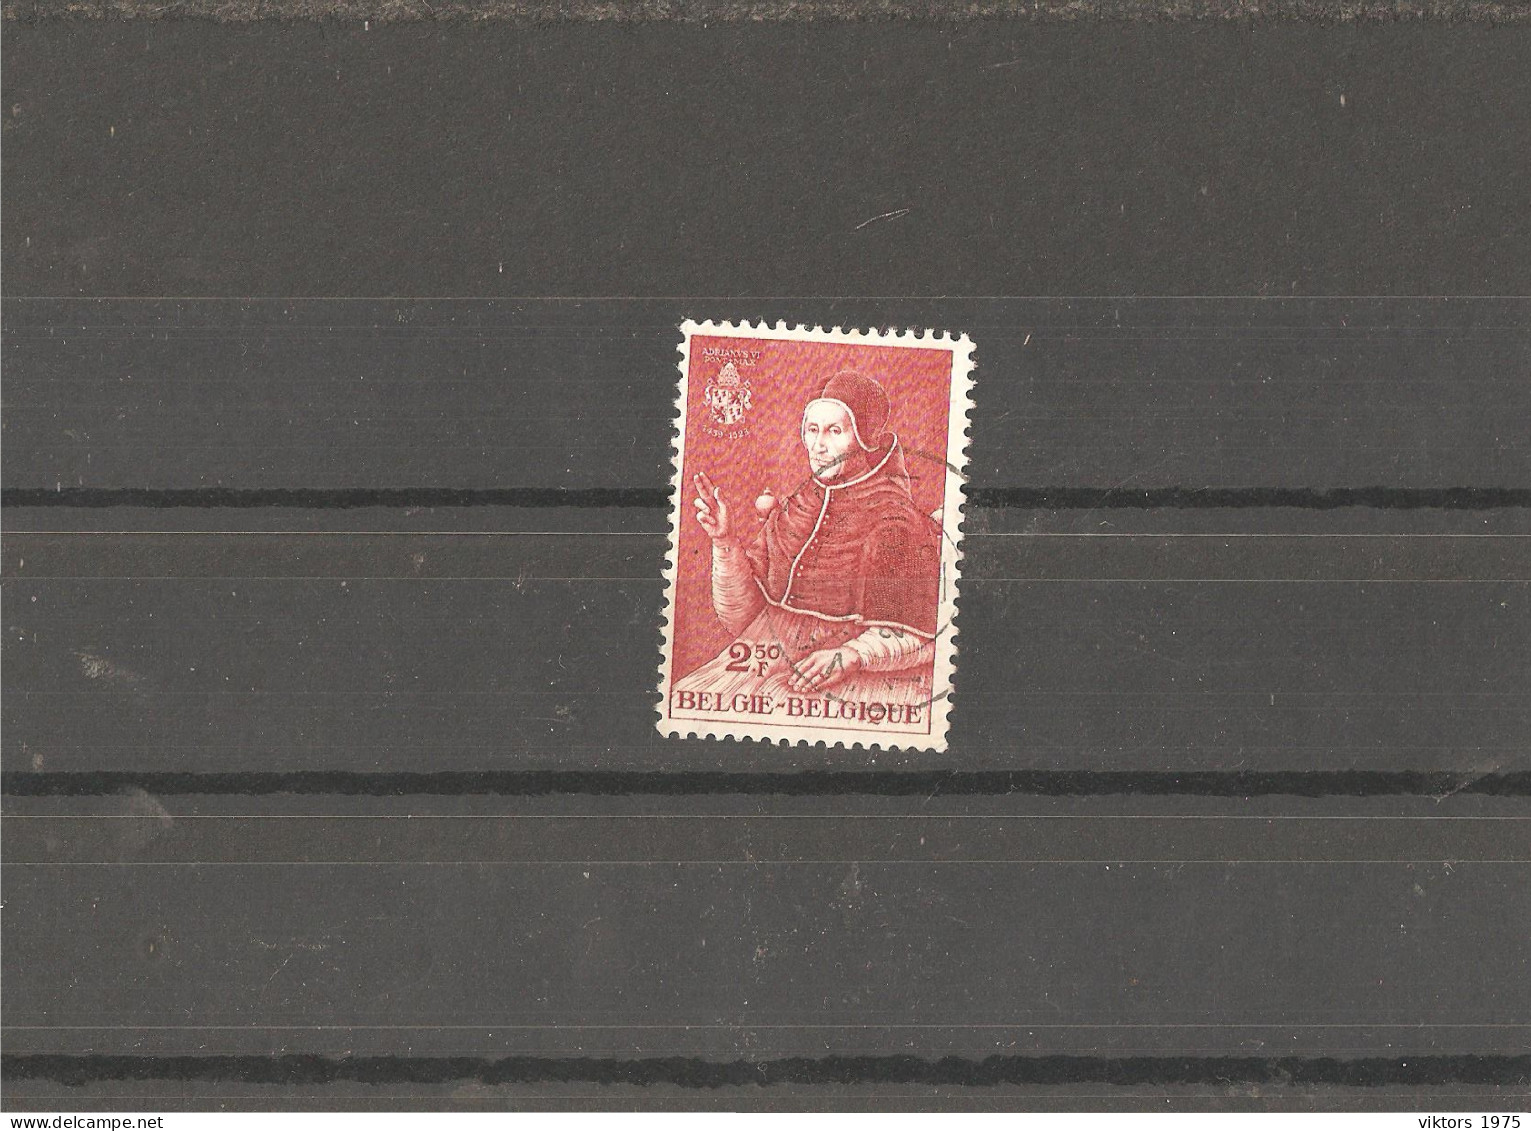 Used Stamp Nr.1162 In MICHEL Catalog - Used Stamps